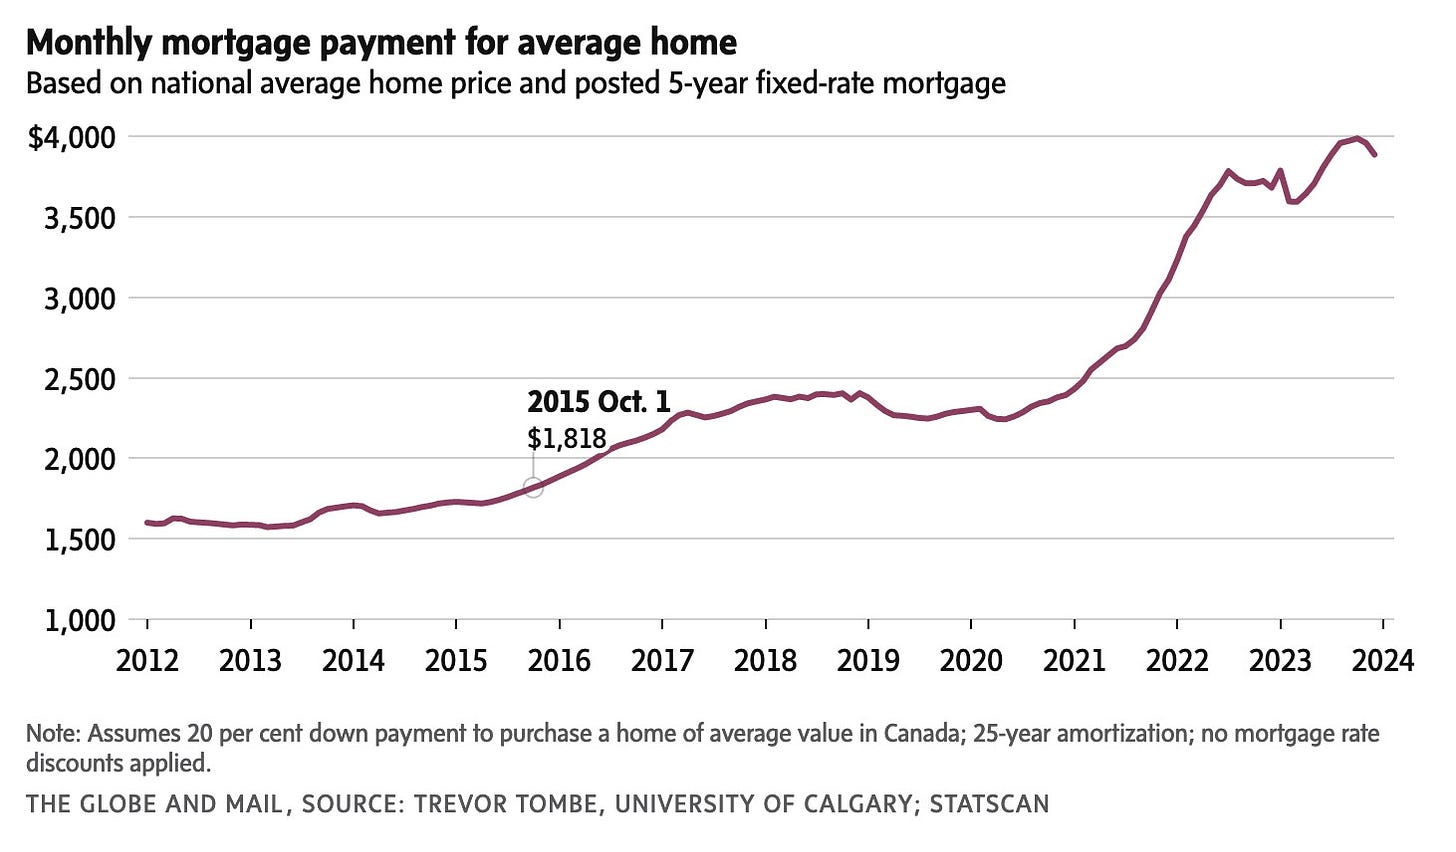 Chart showing monthly mortgage payment for an average home in Canada